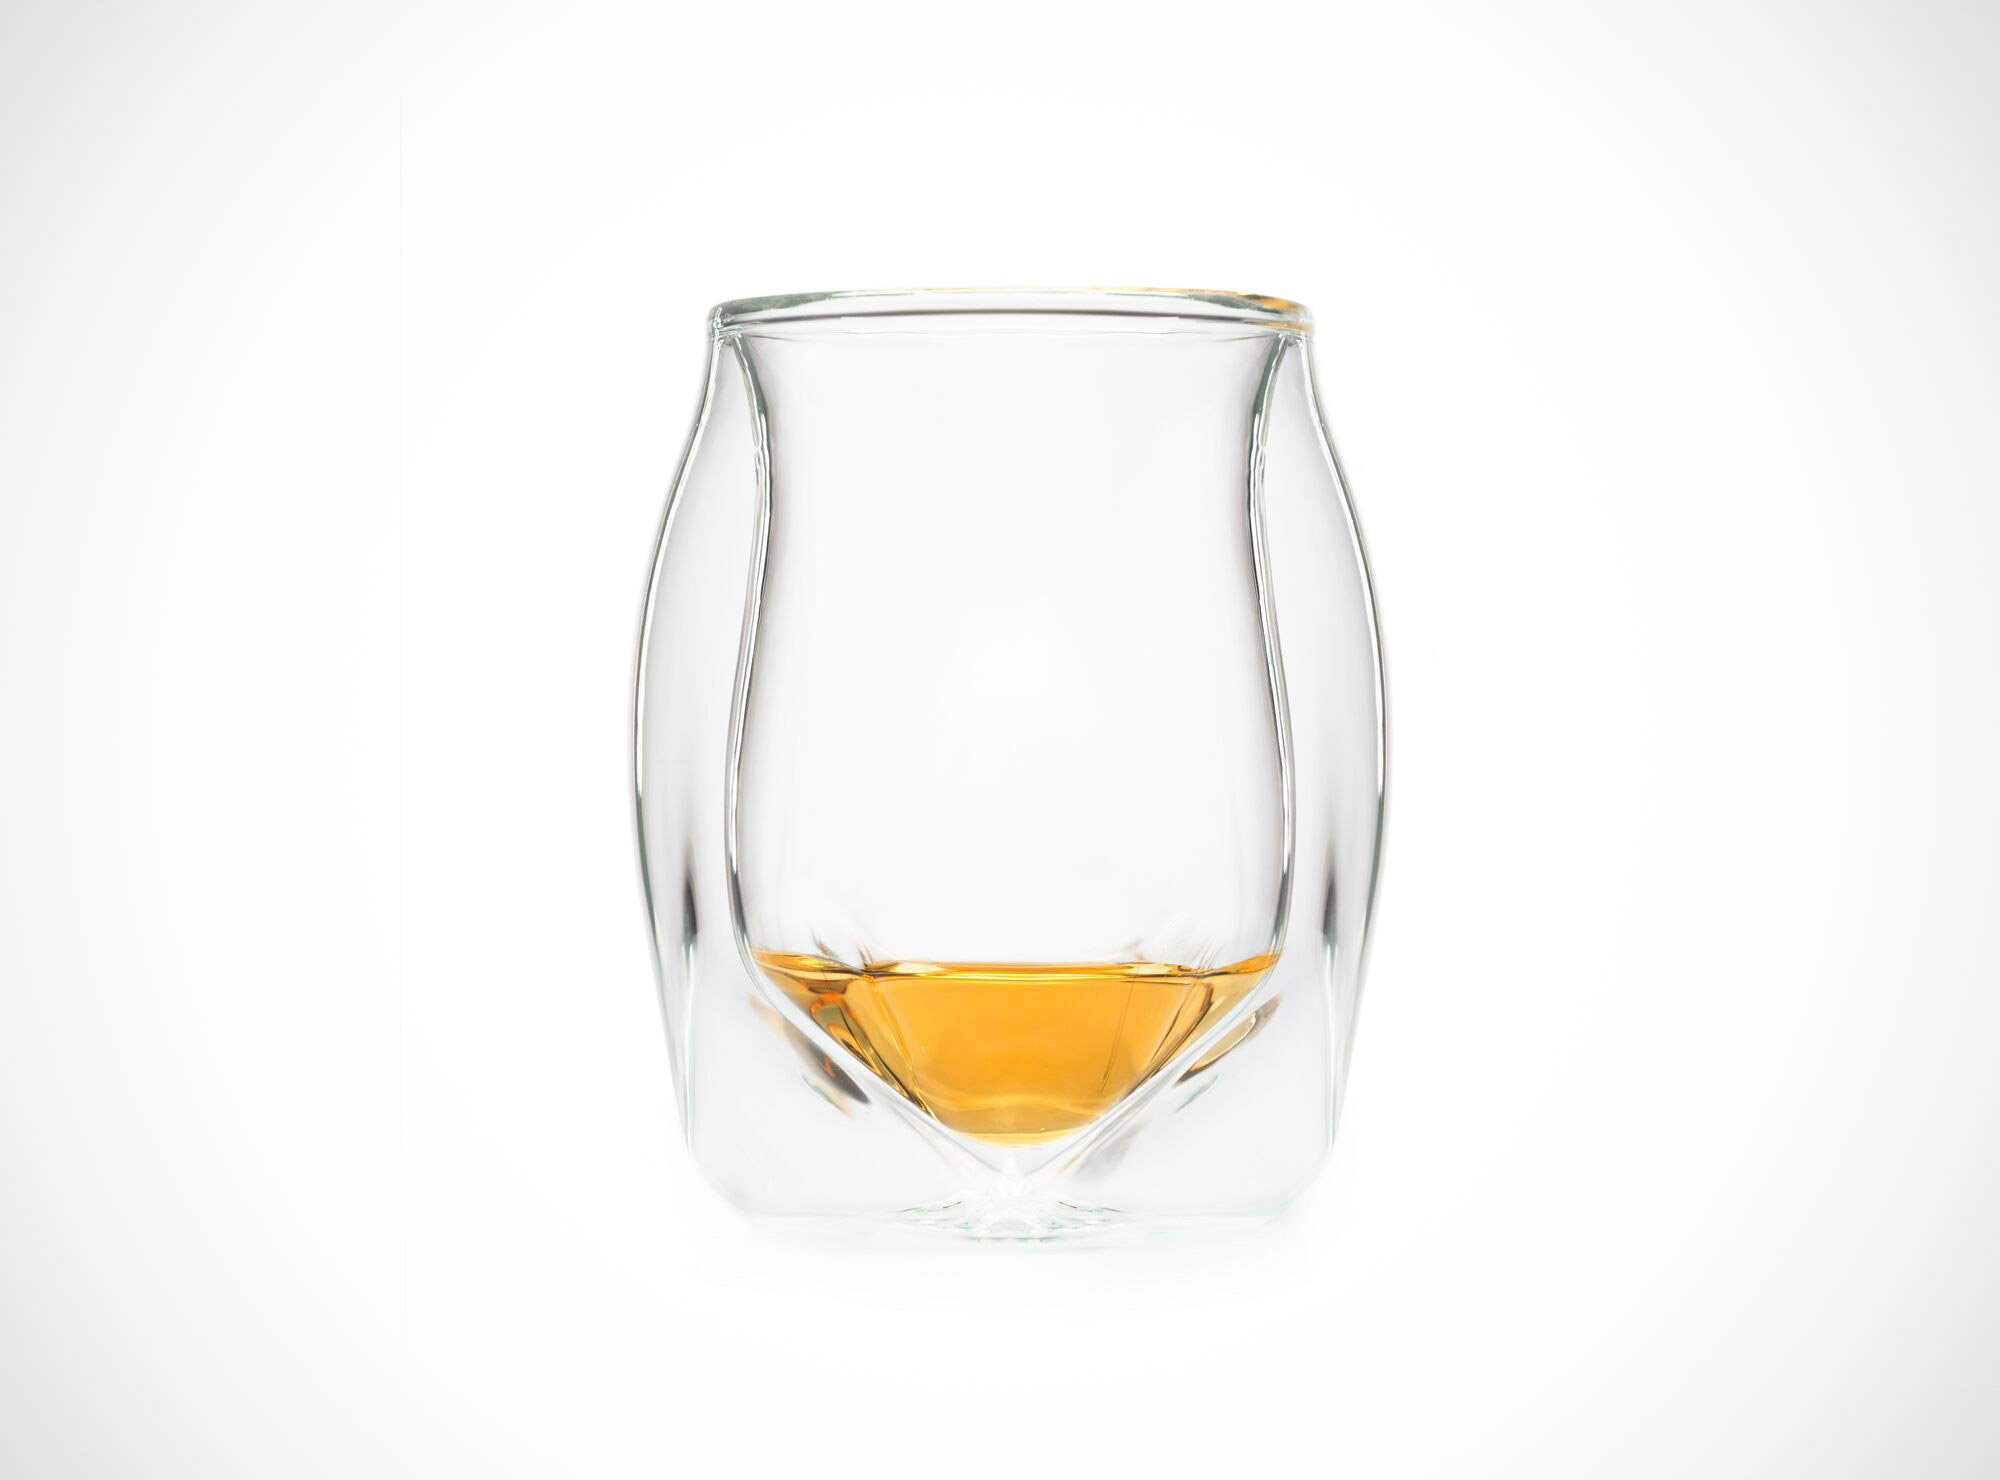 NORLAN Whisky Glass, Set of 2: Old Fashioned Glasses 